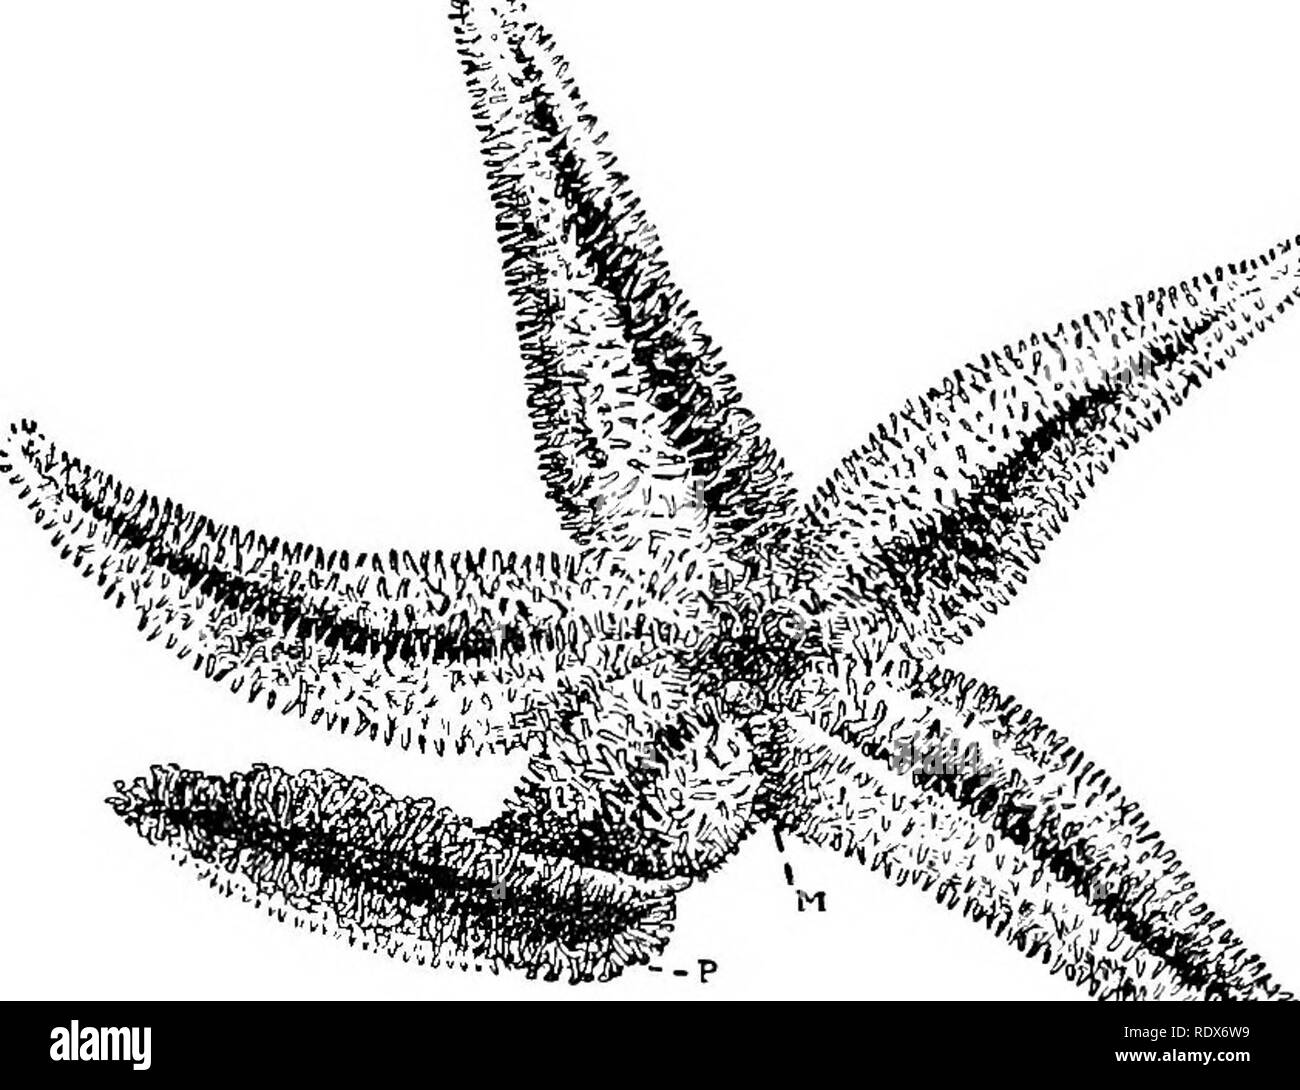 Natural history. Zoology. SUB-KINGDOM V.—ECHINODERMA. STAR-FISH, ETC. By F.  a. Bather, ., ., Etc. This is one of the main groups of the animal  kingdom, and the animals contained in it,